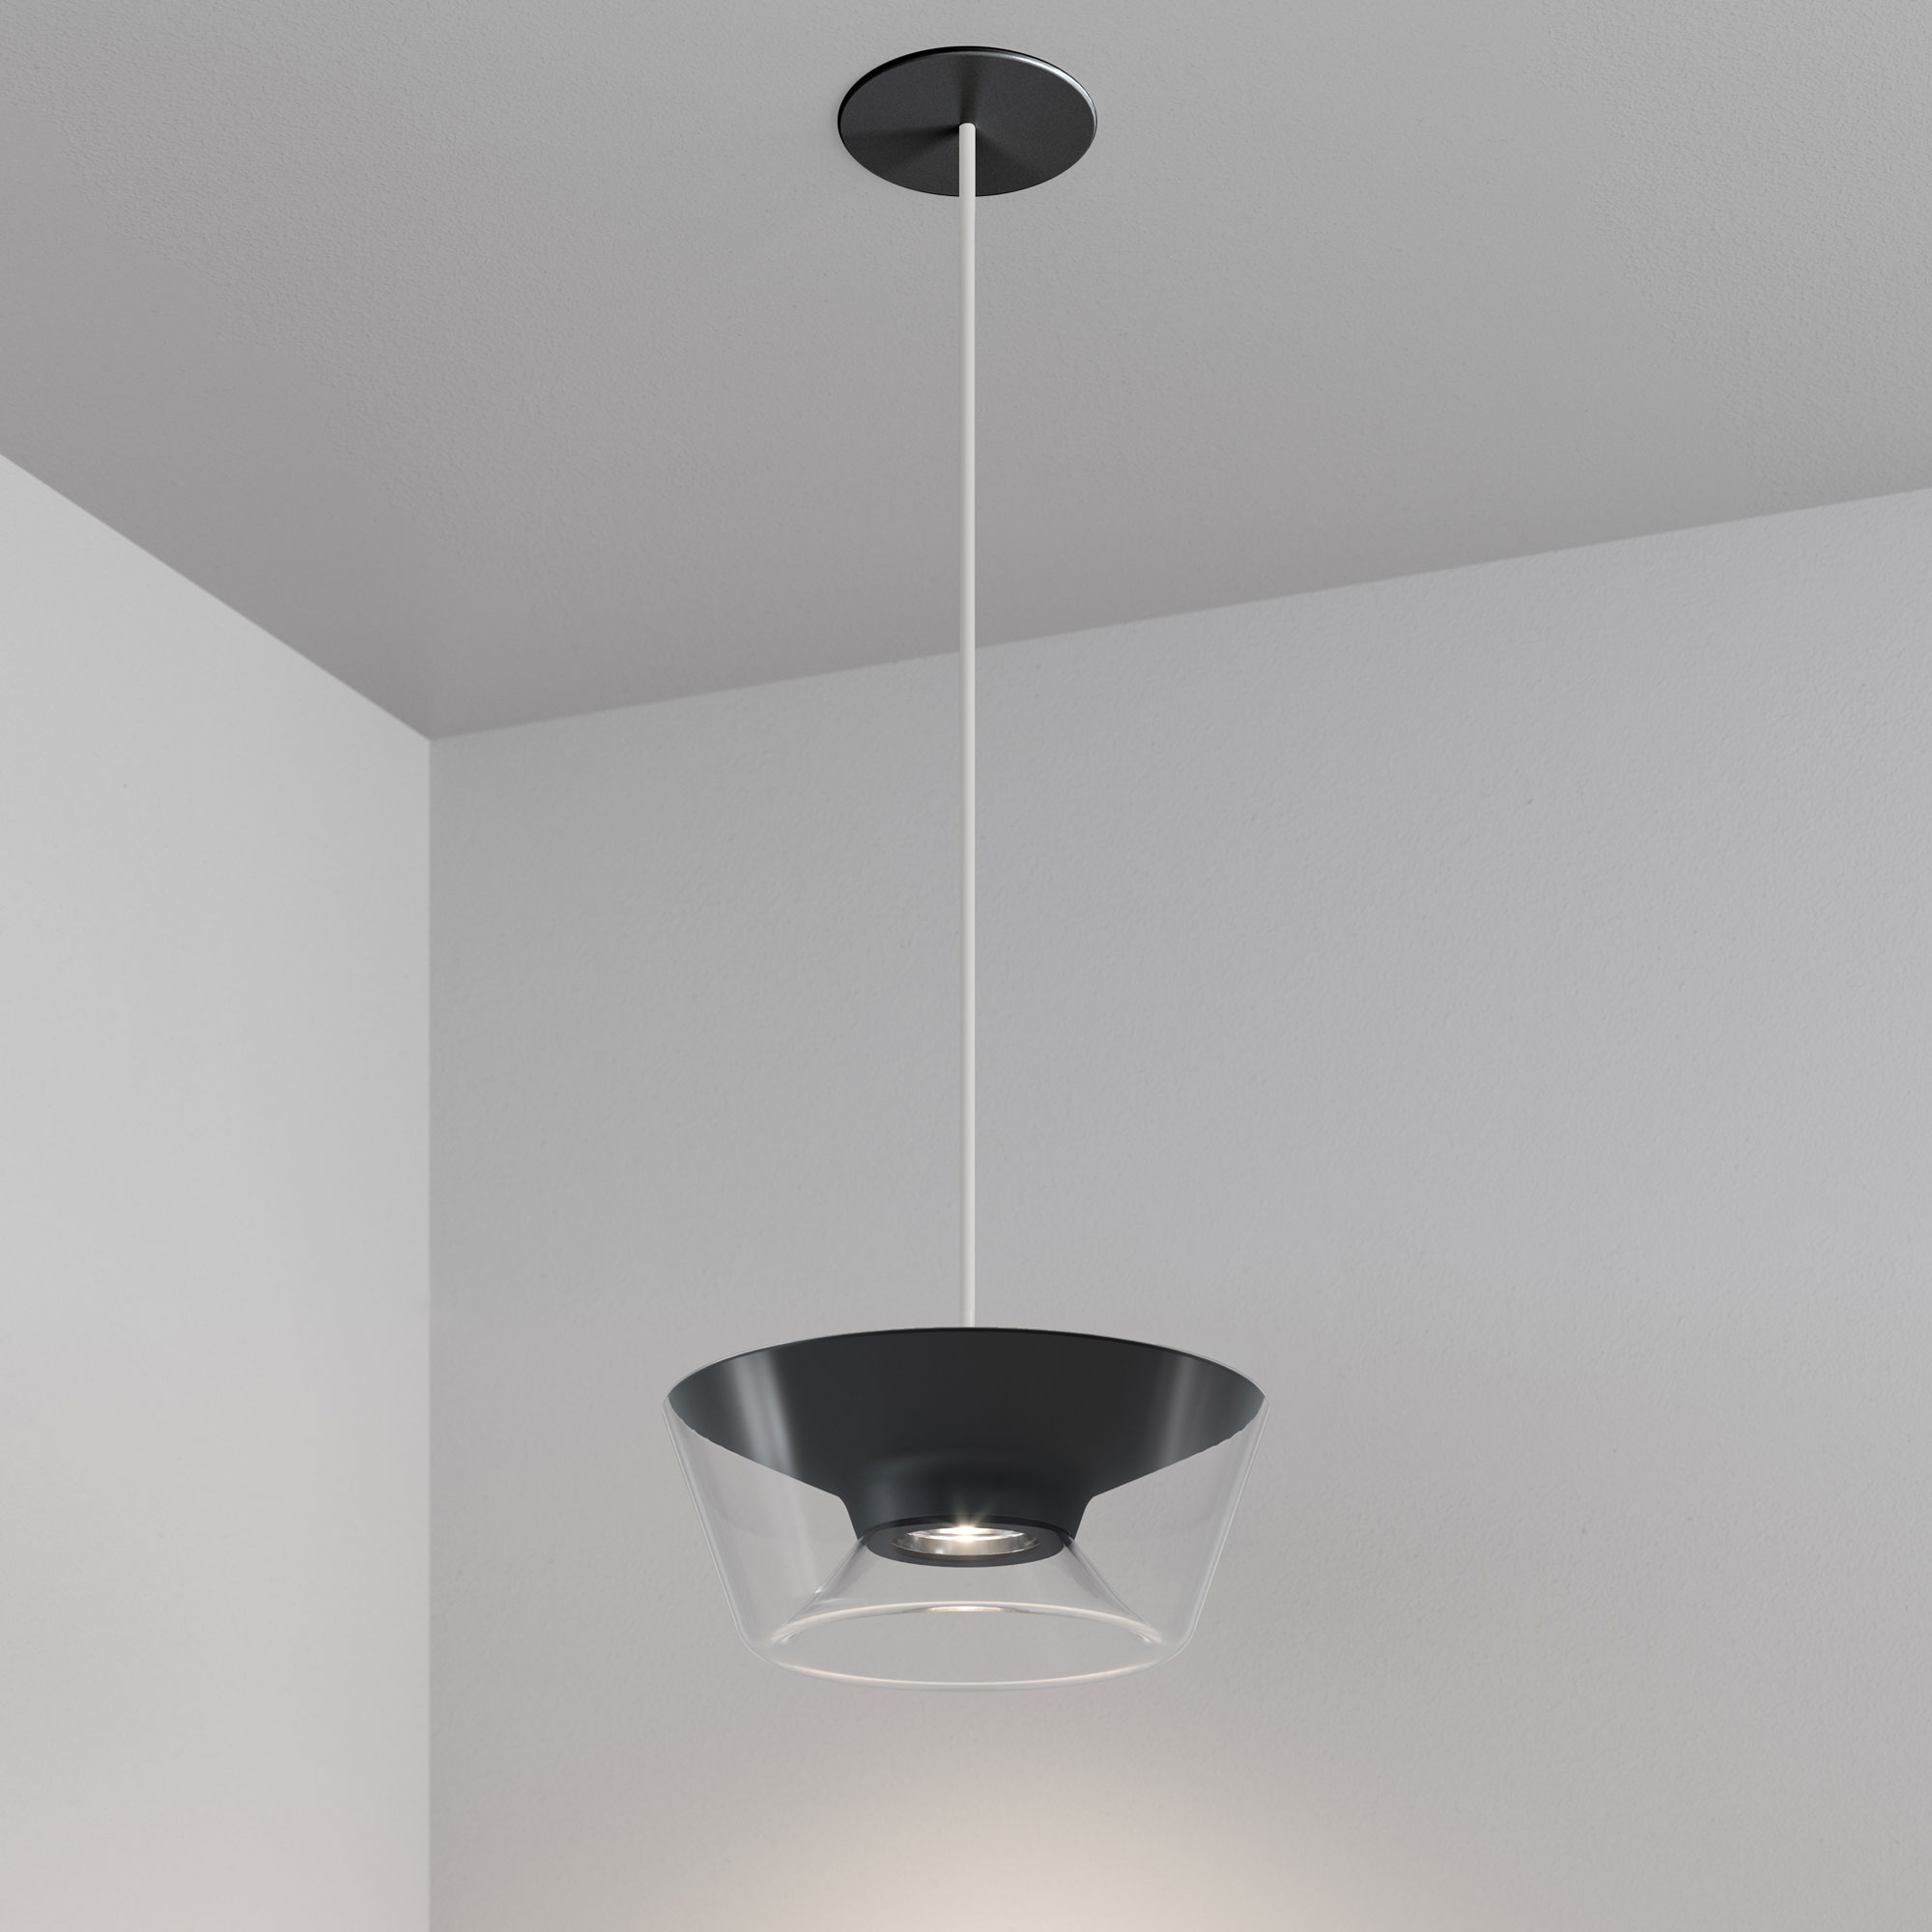 Recessed Pendant by Lucifer Lighting | S2F192BKBKW9027354PHX | LCF1038906